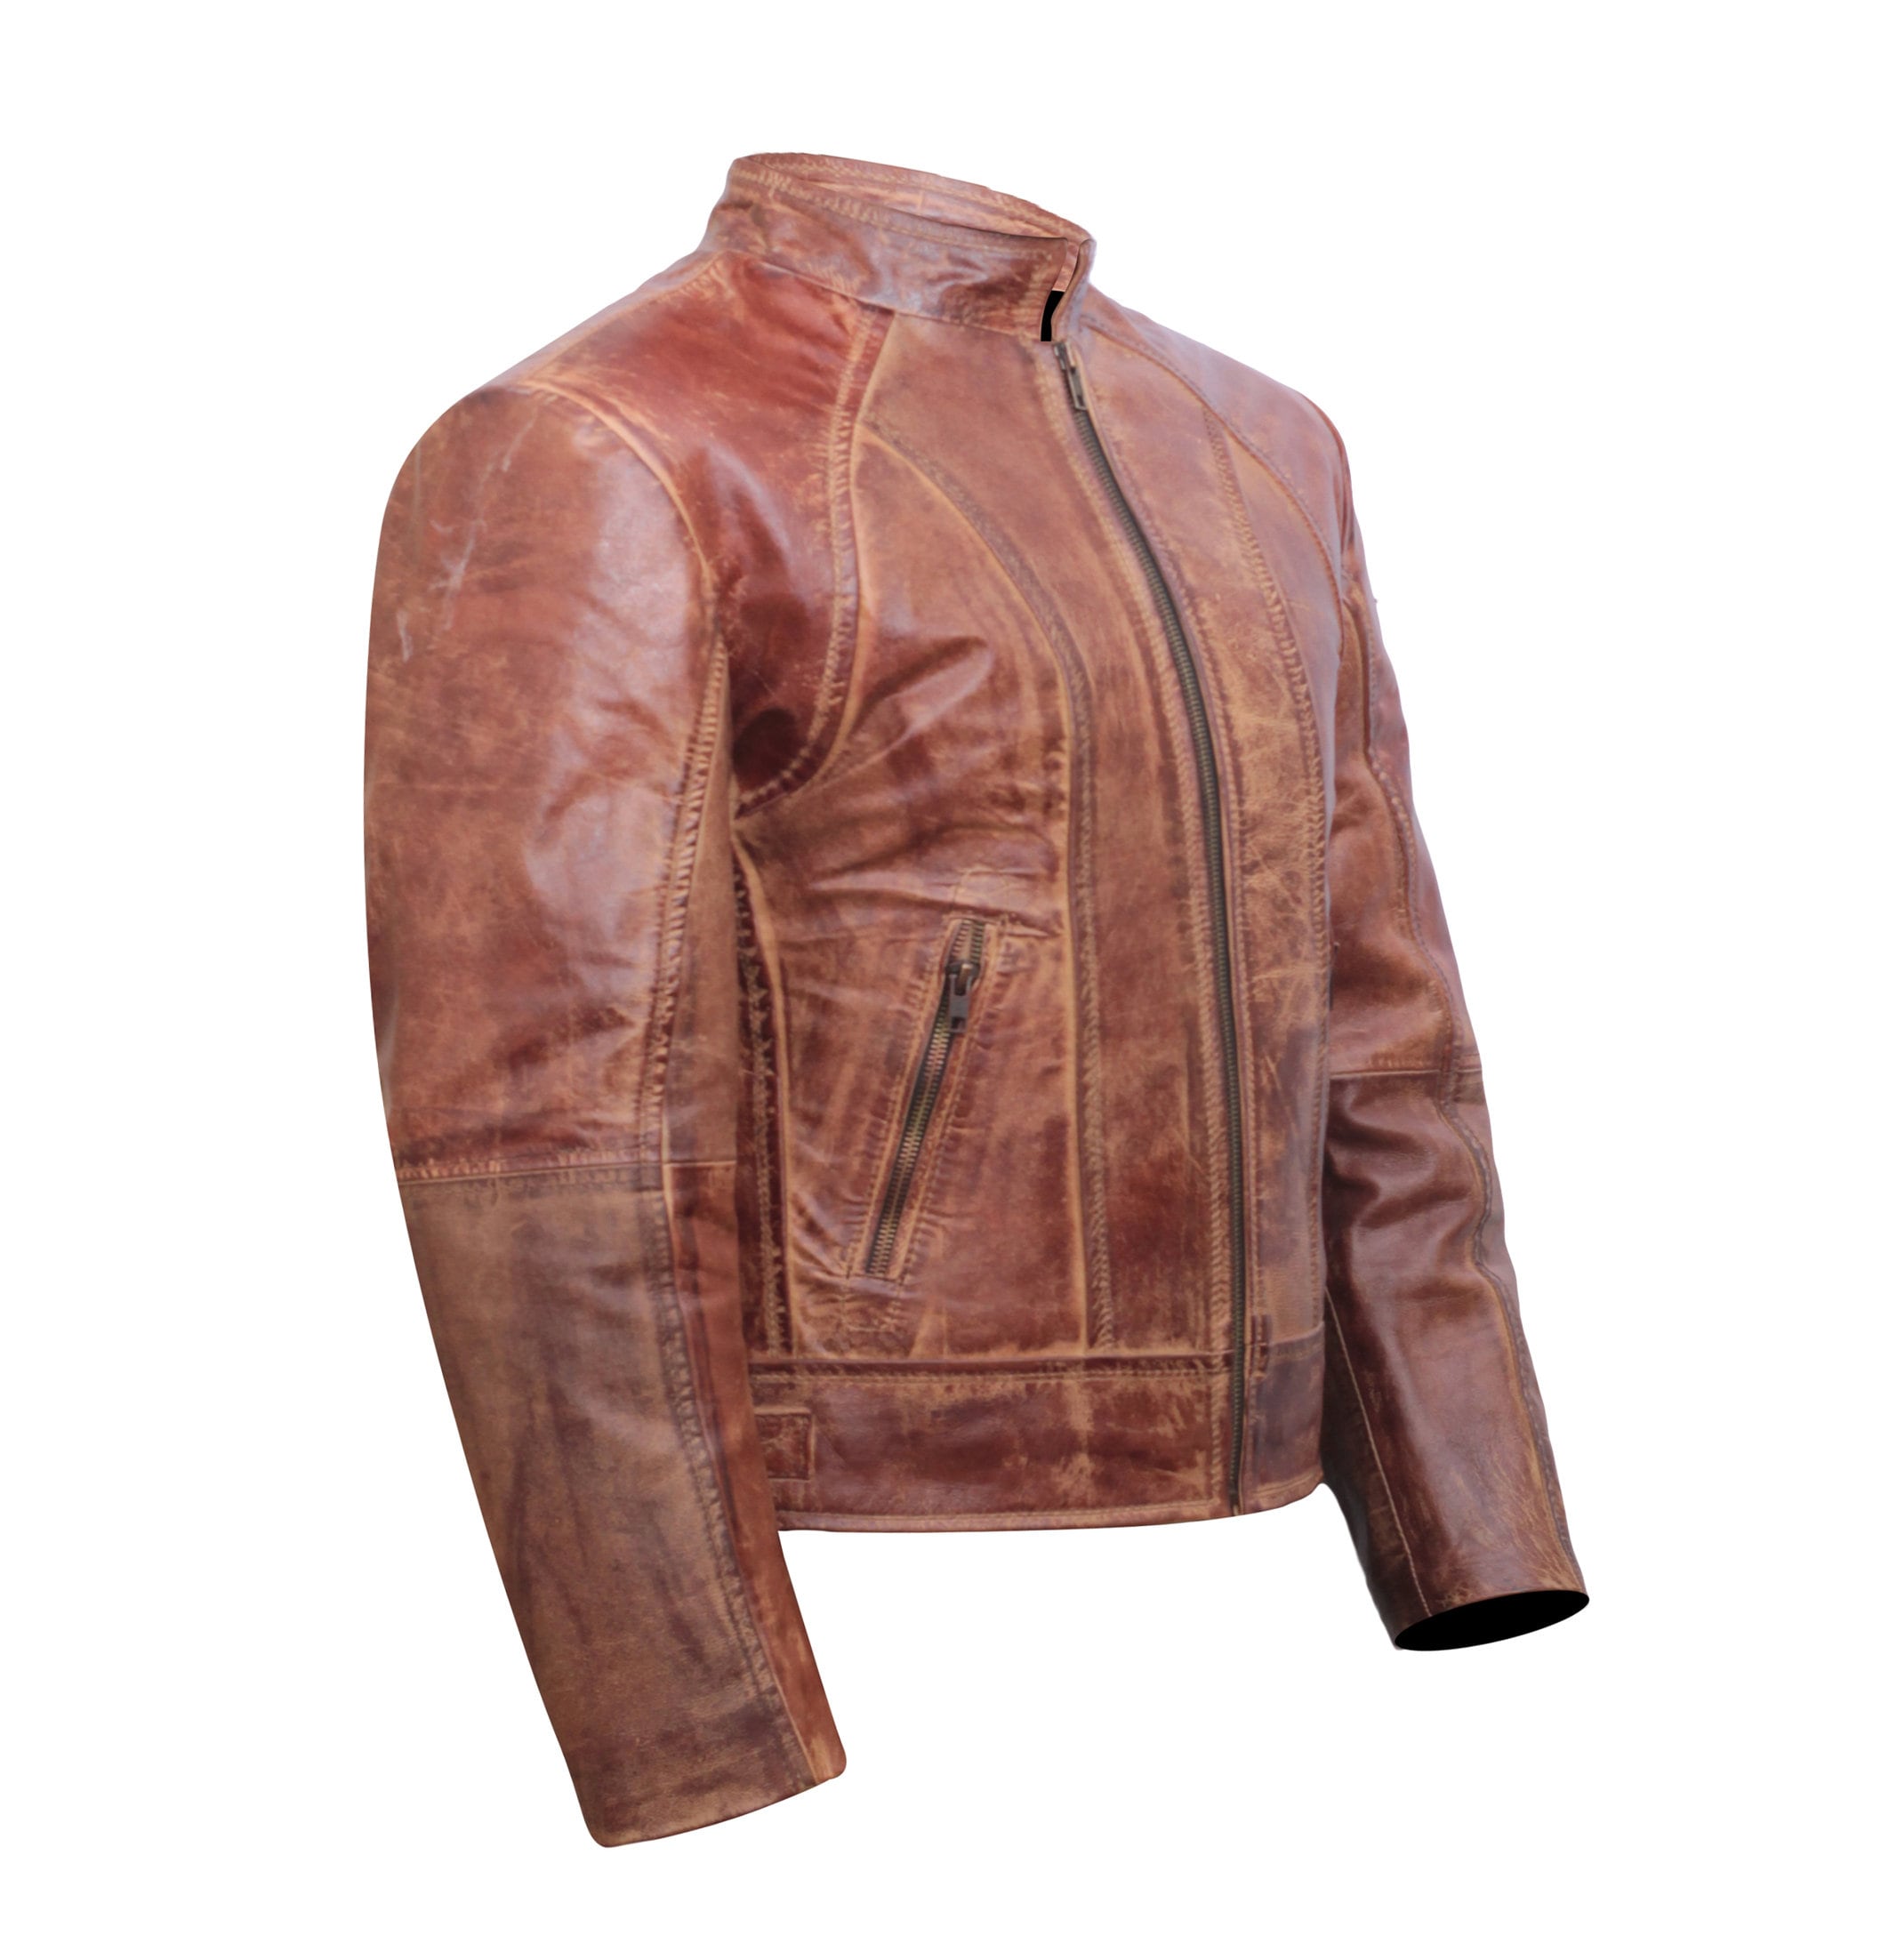 Brown Distressed Leather Jacket Women